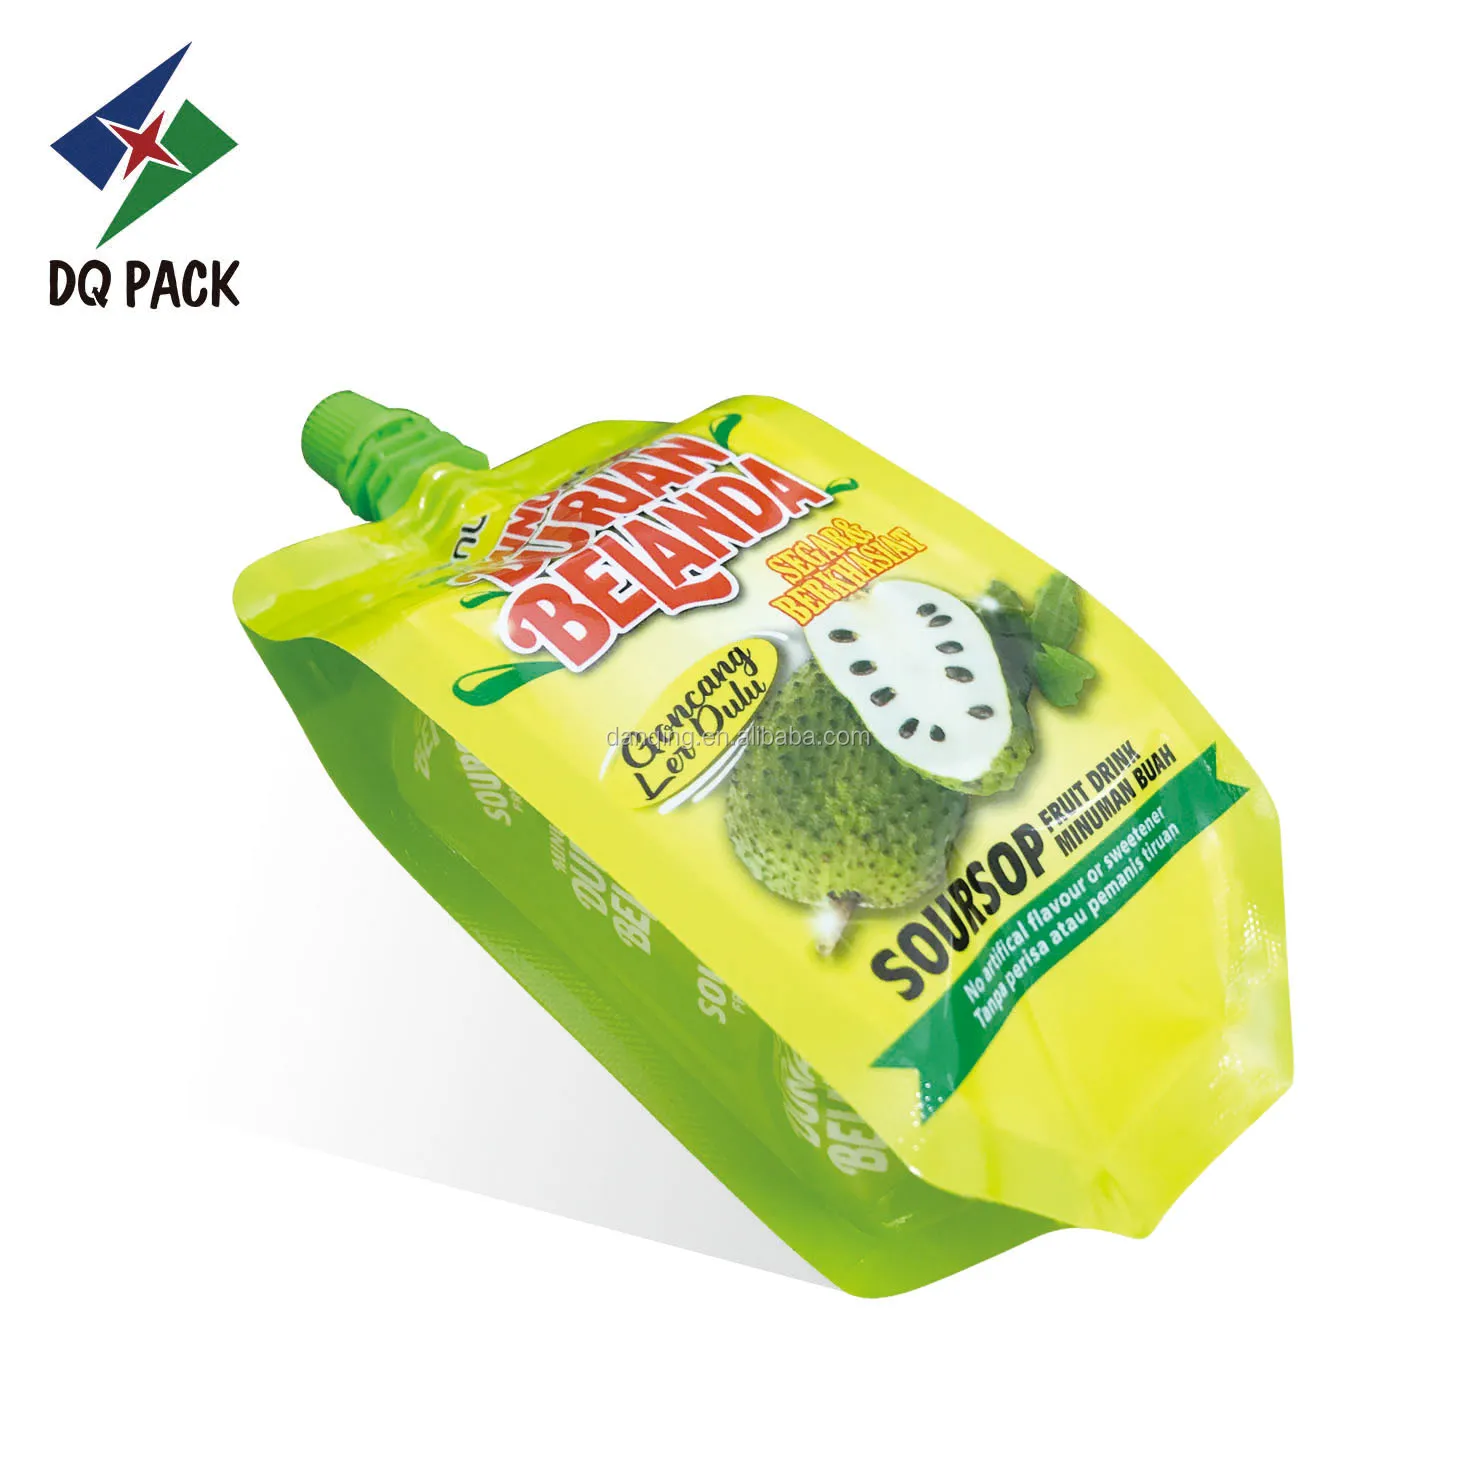 DQ PACK New Baby Food Milk Spout Pouch Drink